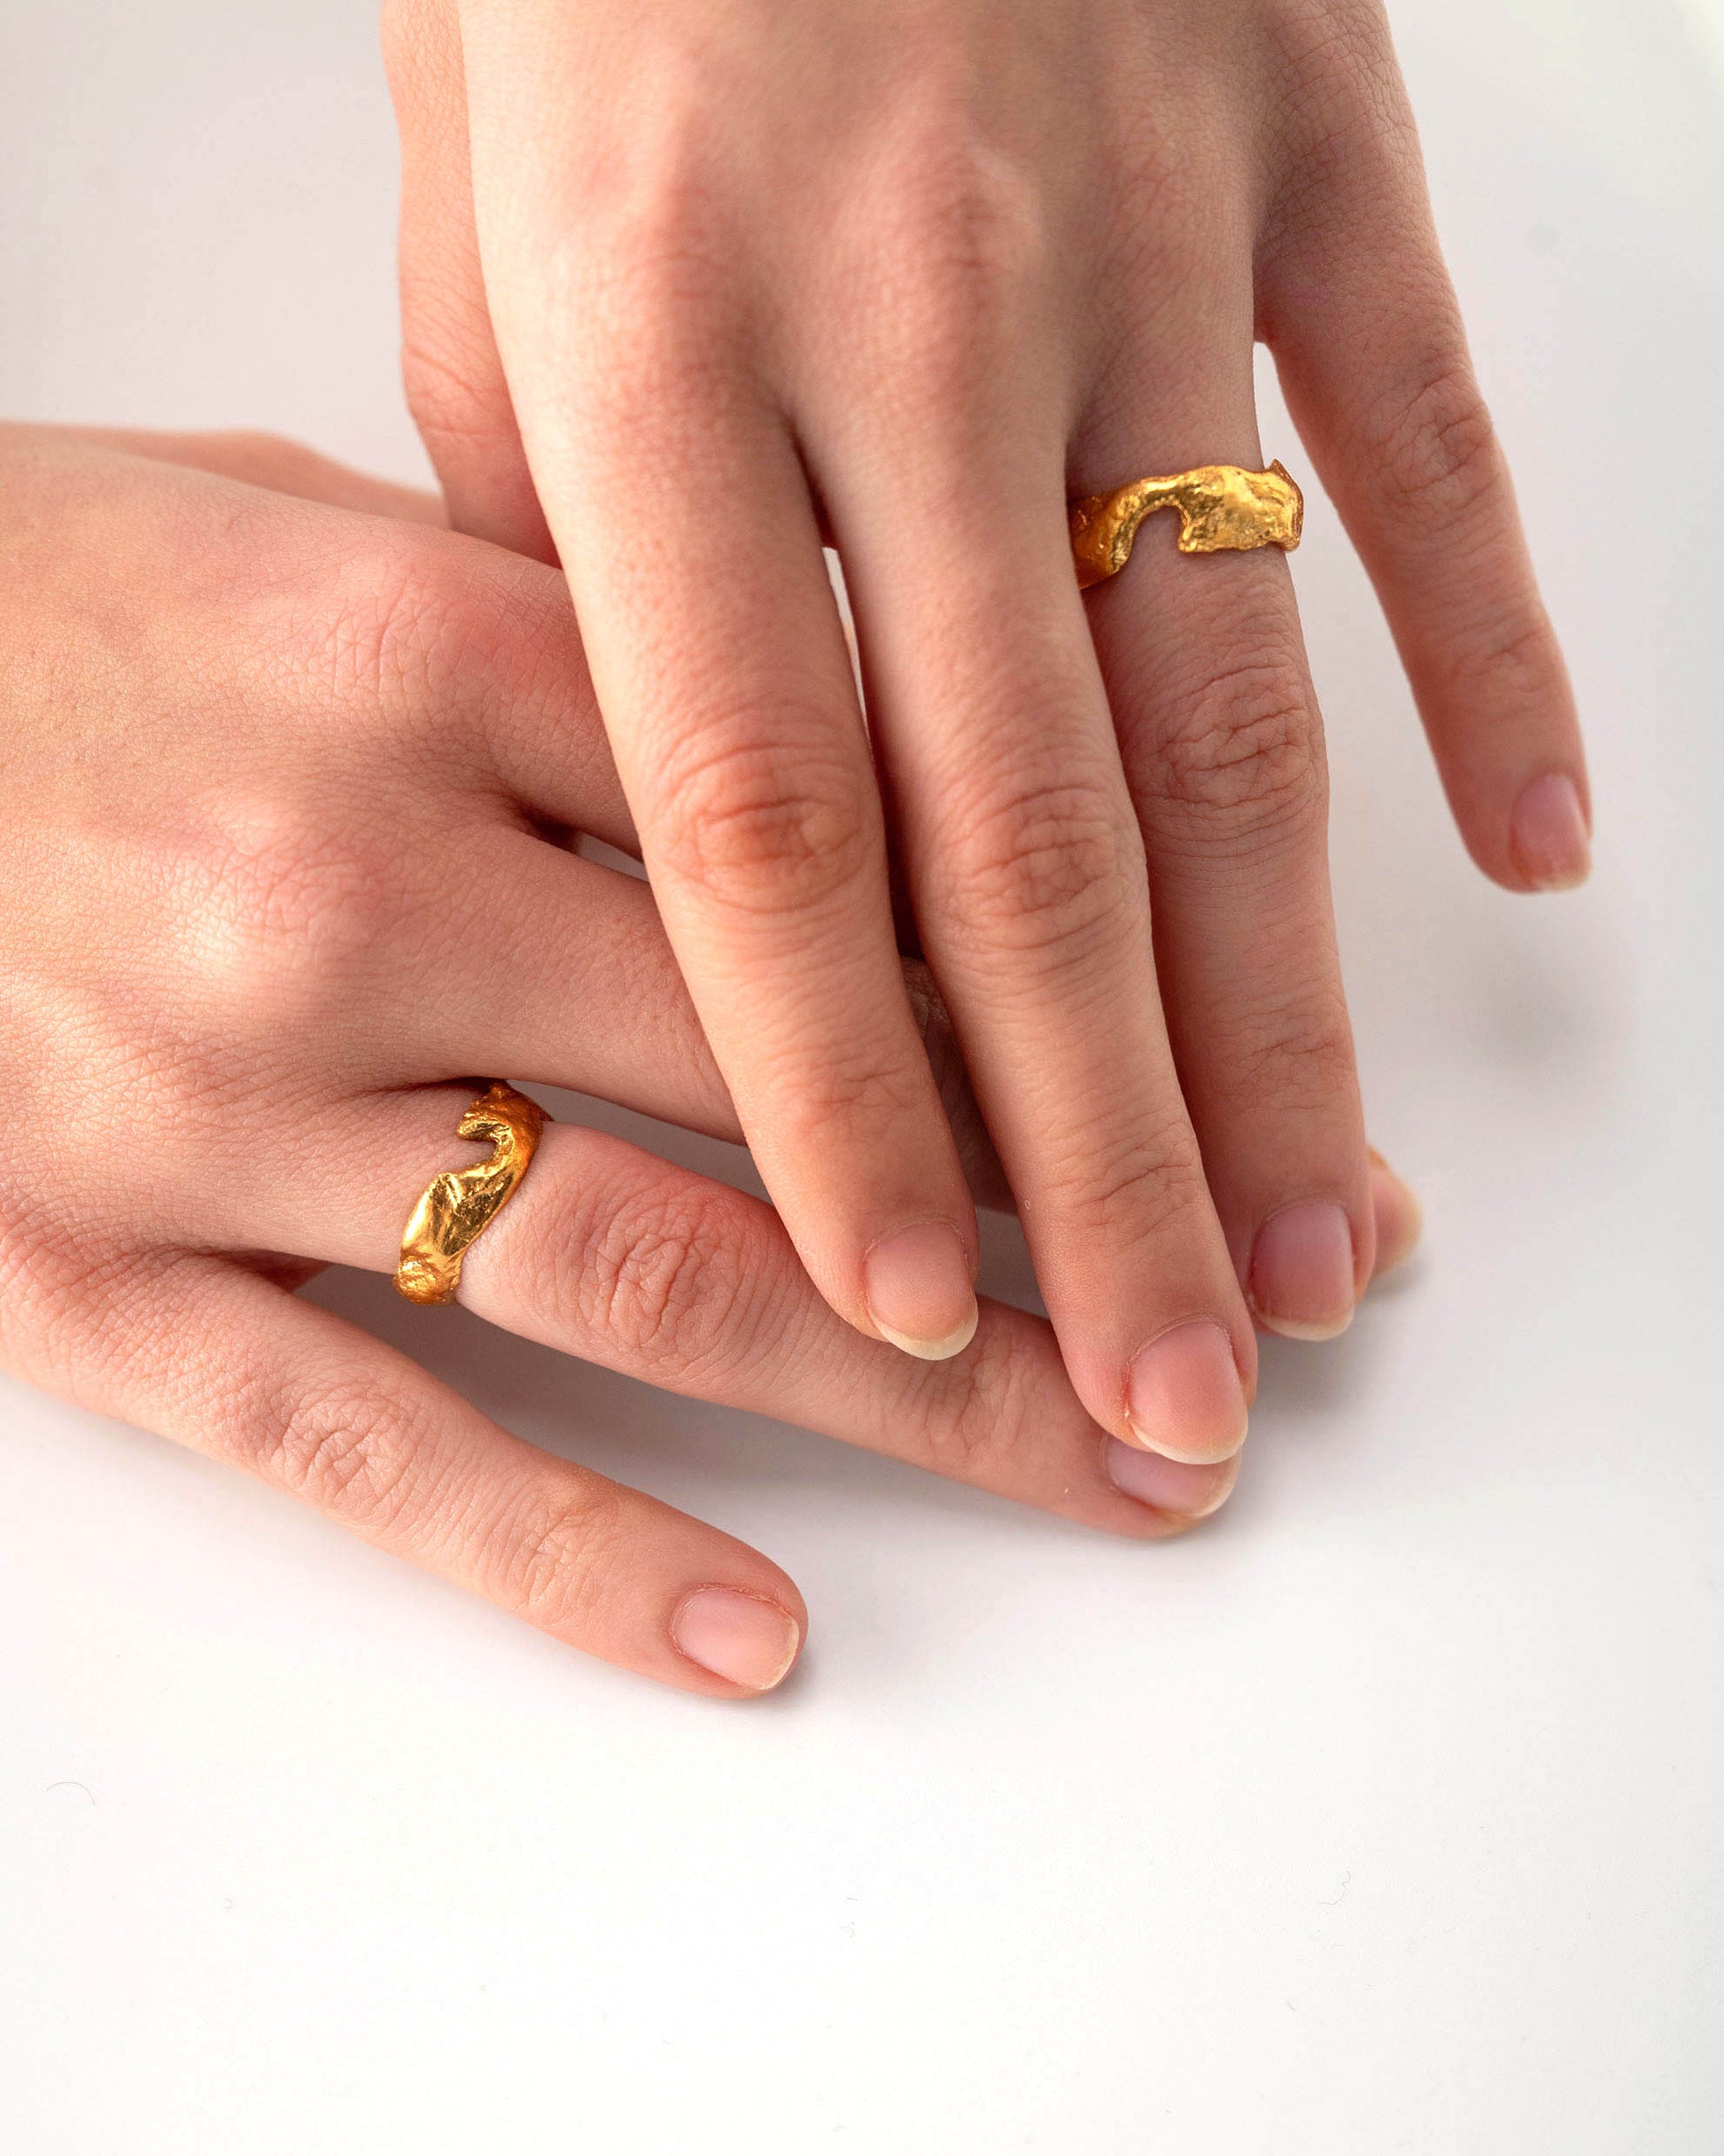 destiny-couple-ring-gold-on-hand-andre-jewelry